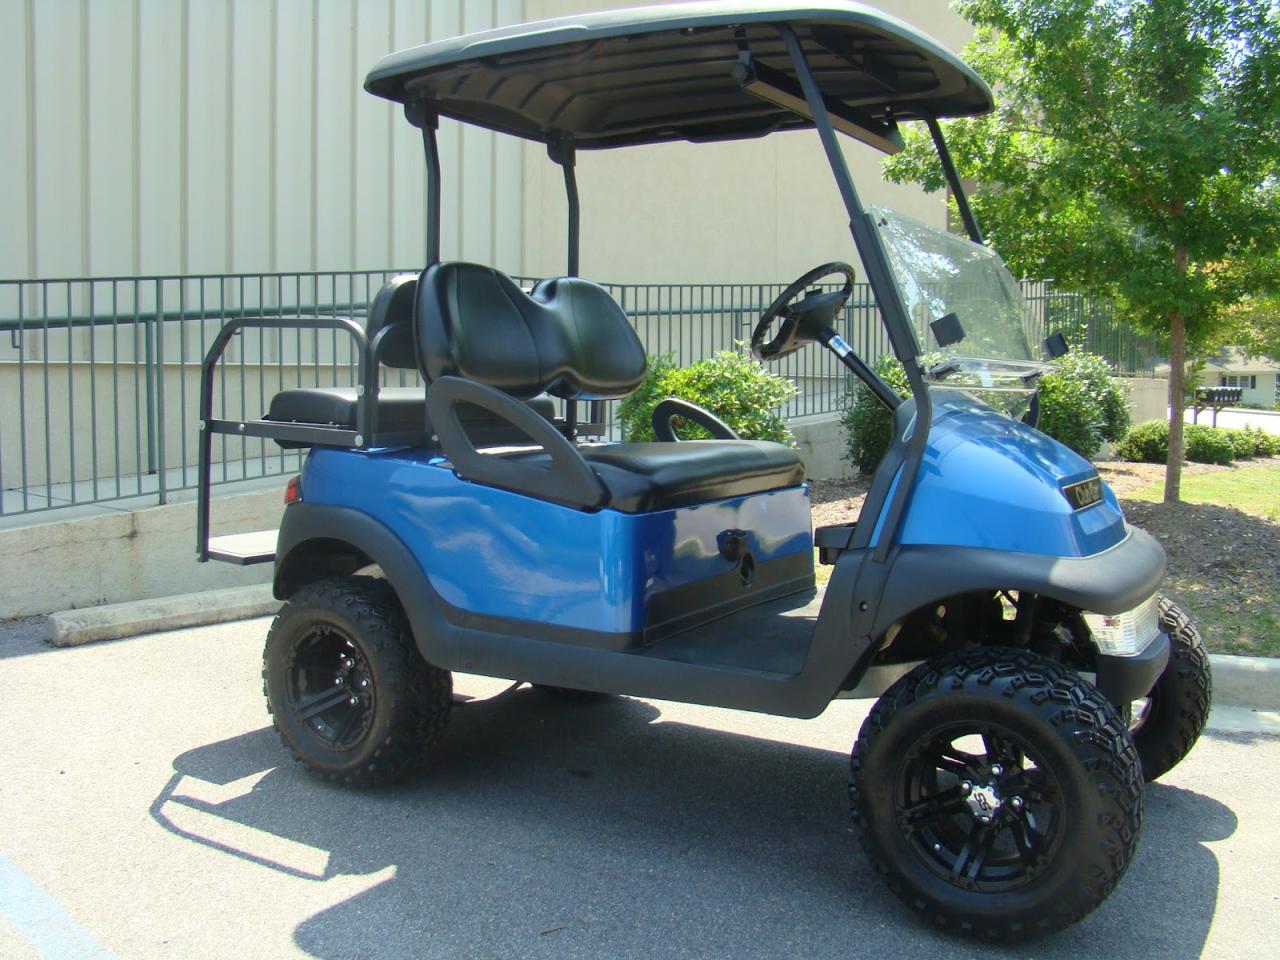 Find Your Dream Ride: Used Golf Carts for Sale by Owner in Johnson, Nebraska